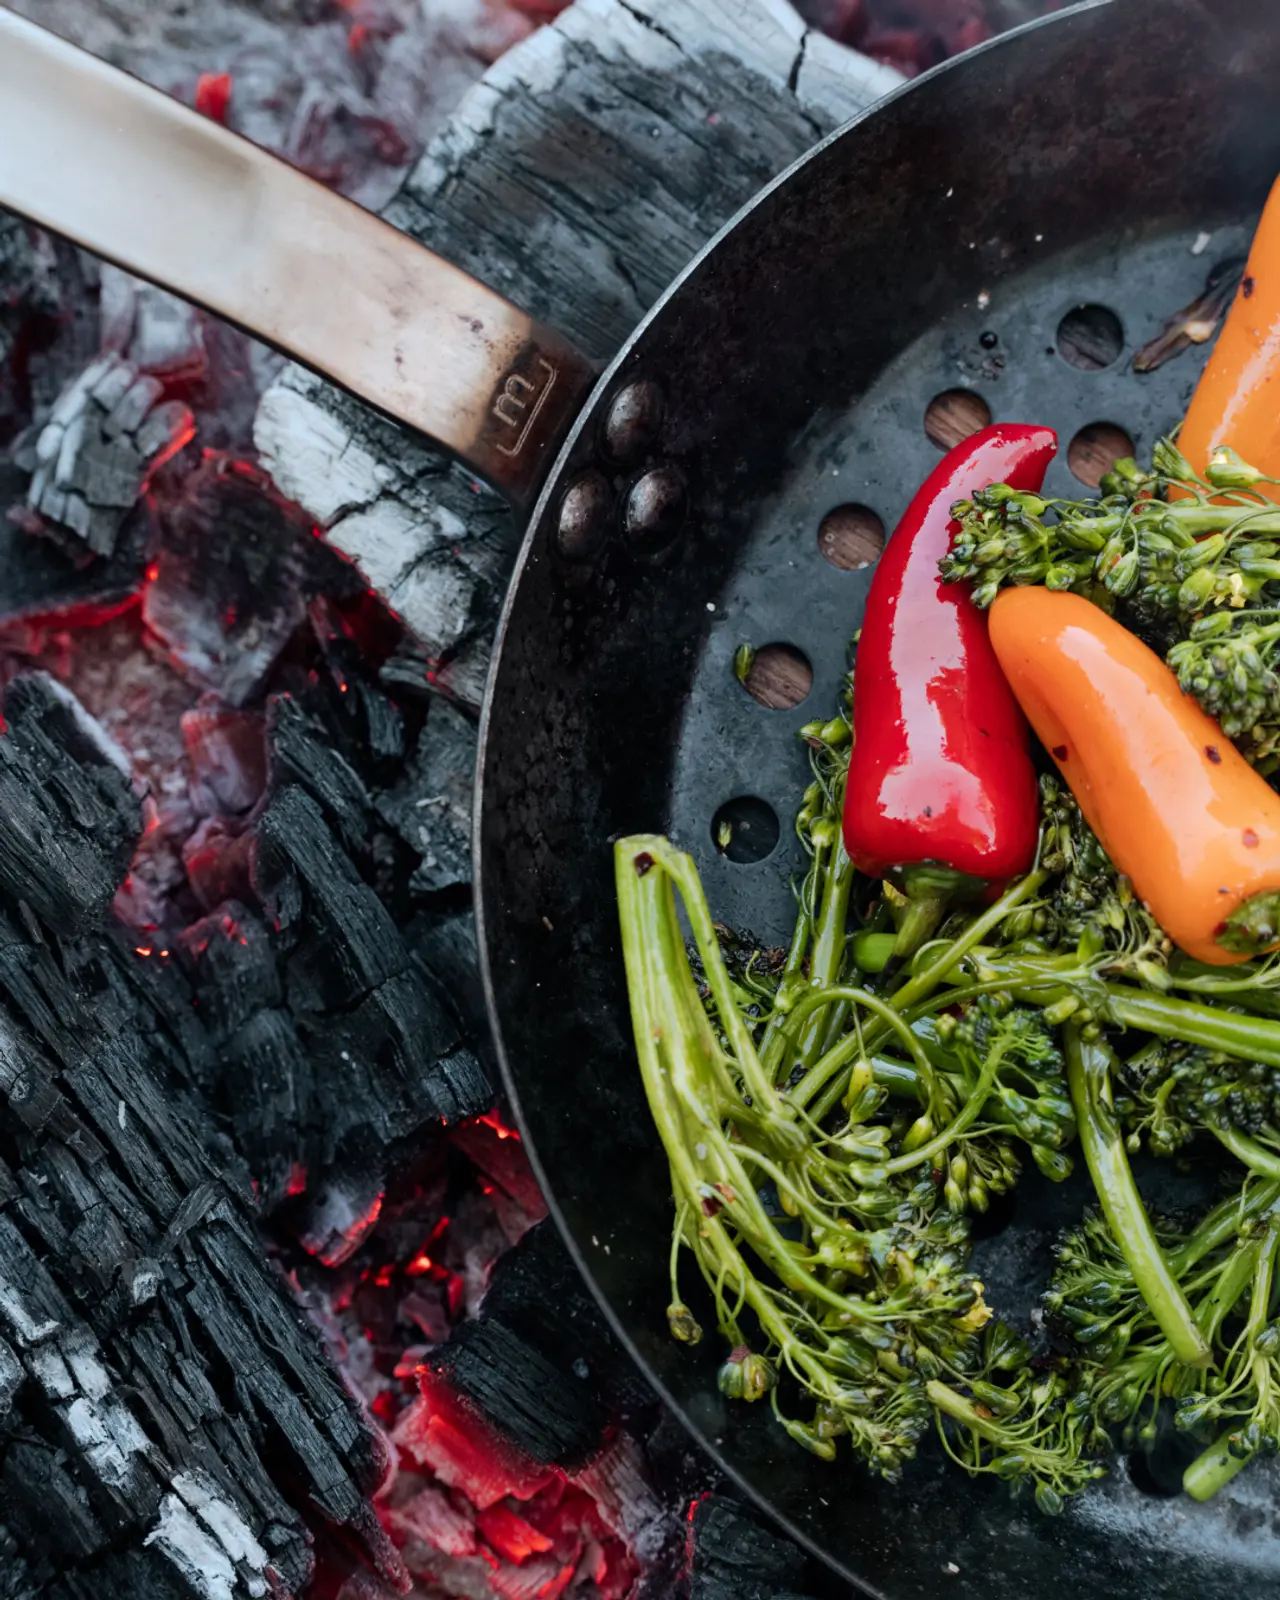 A skillet with vegetables is being cooked over red-hot charcoal embers.